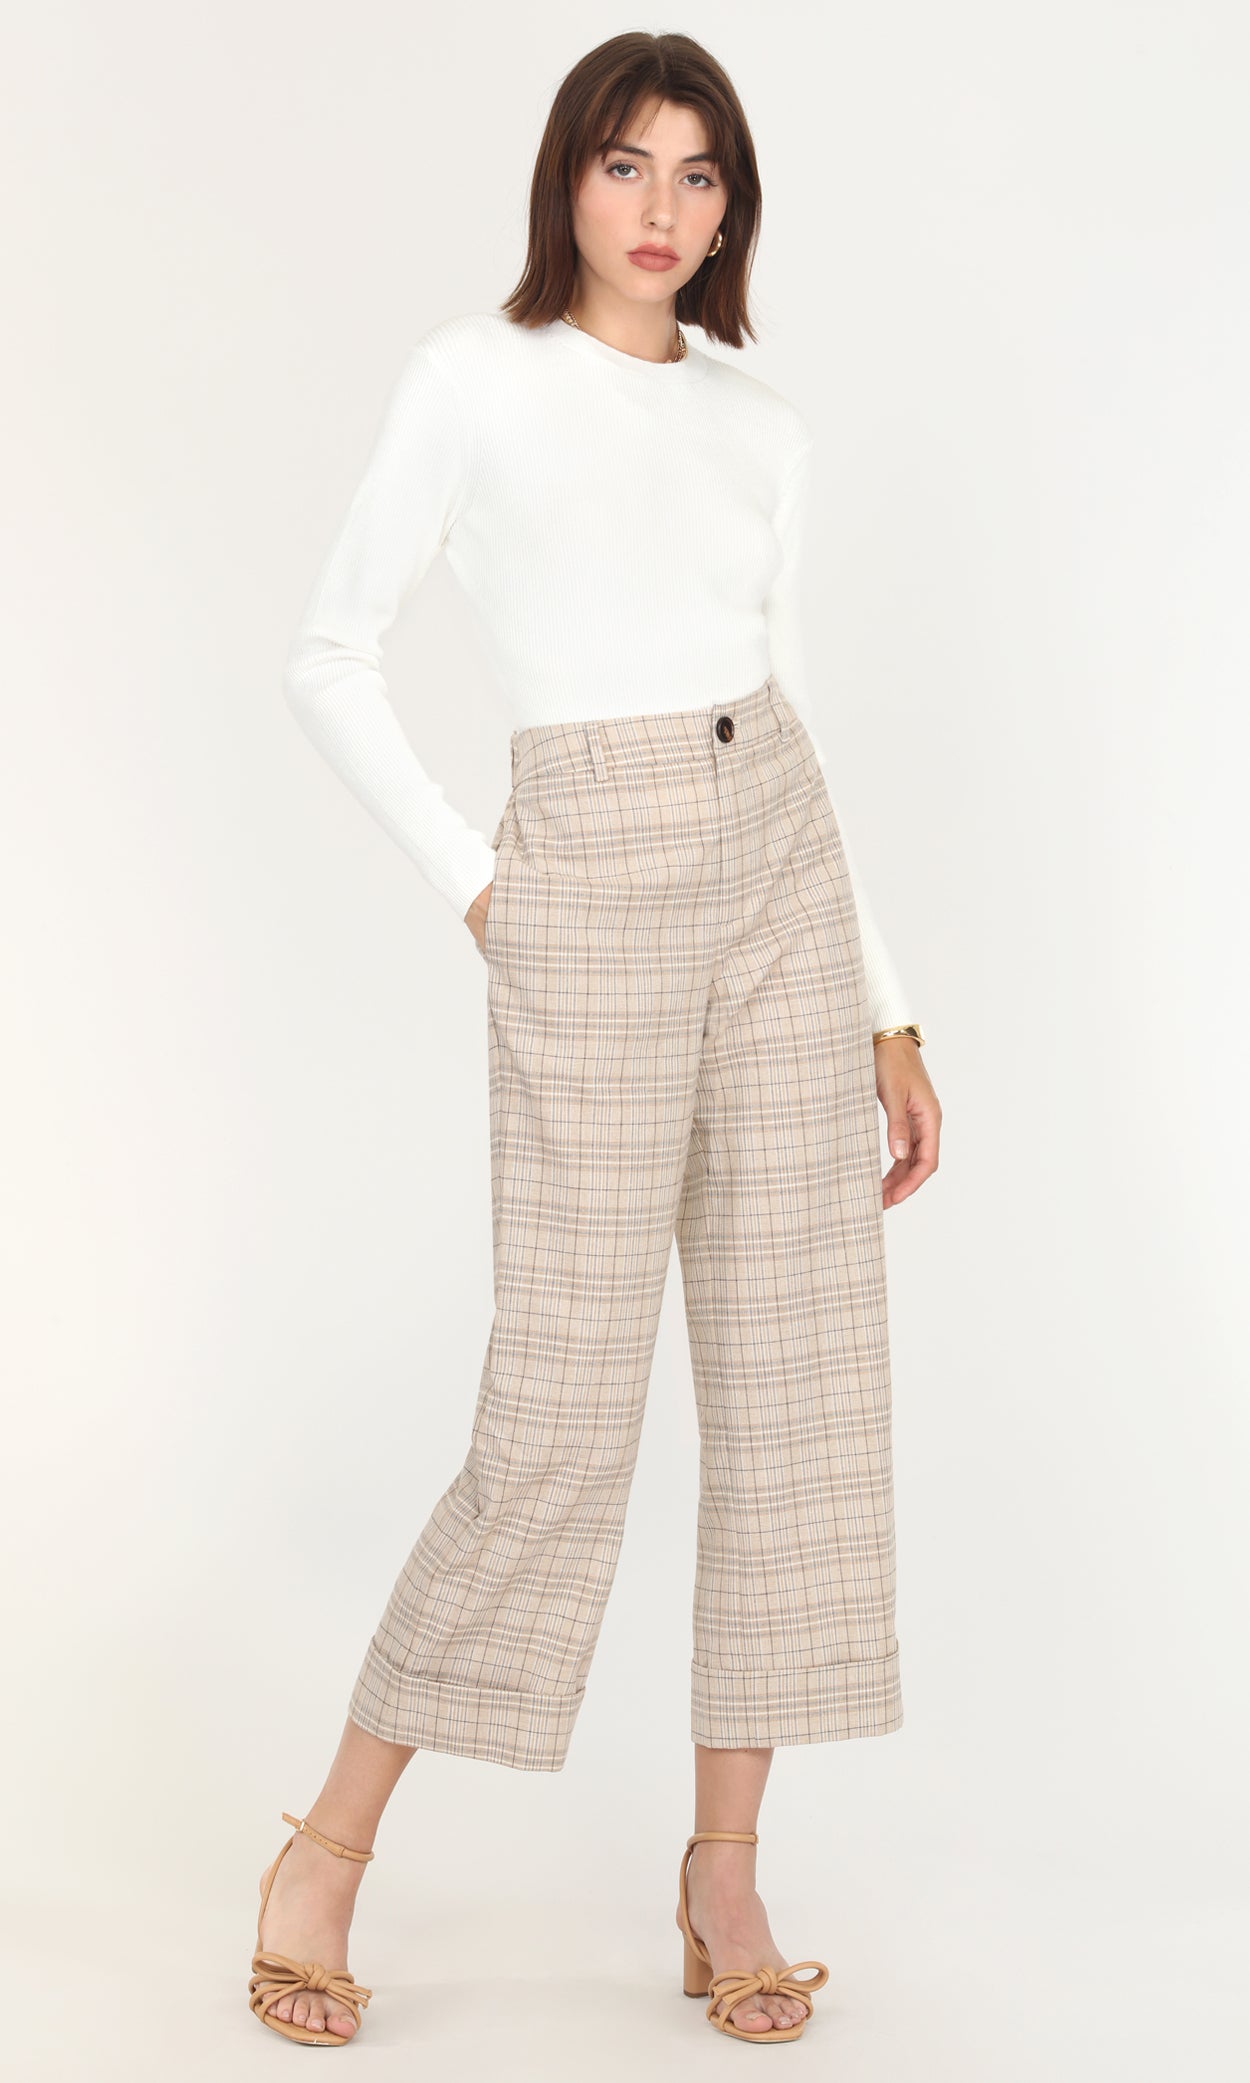 Women's High Waist Stretchable Formal Wide Leg Parallel Trouser